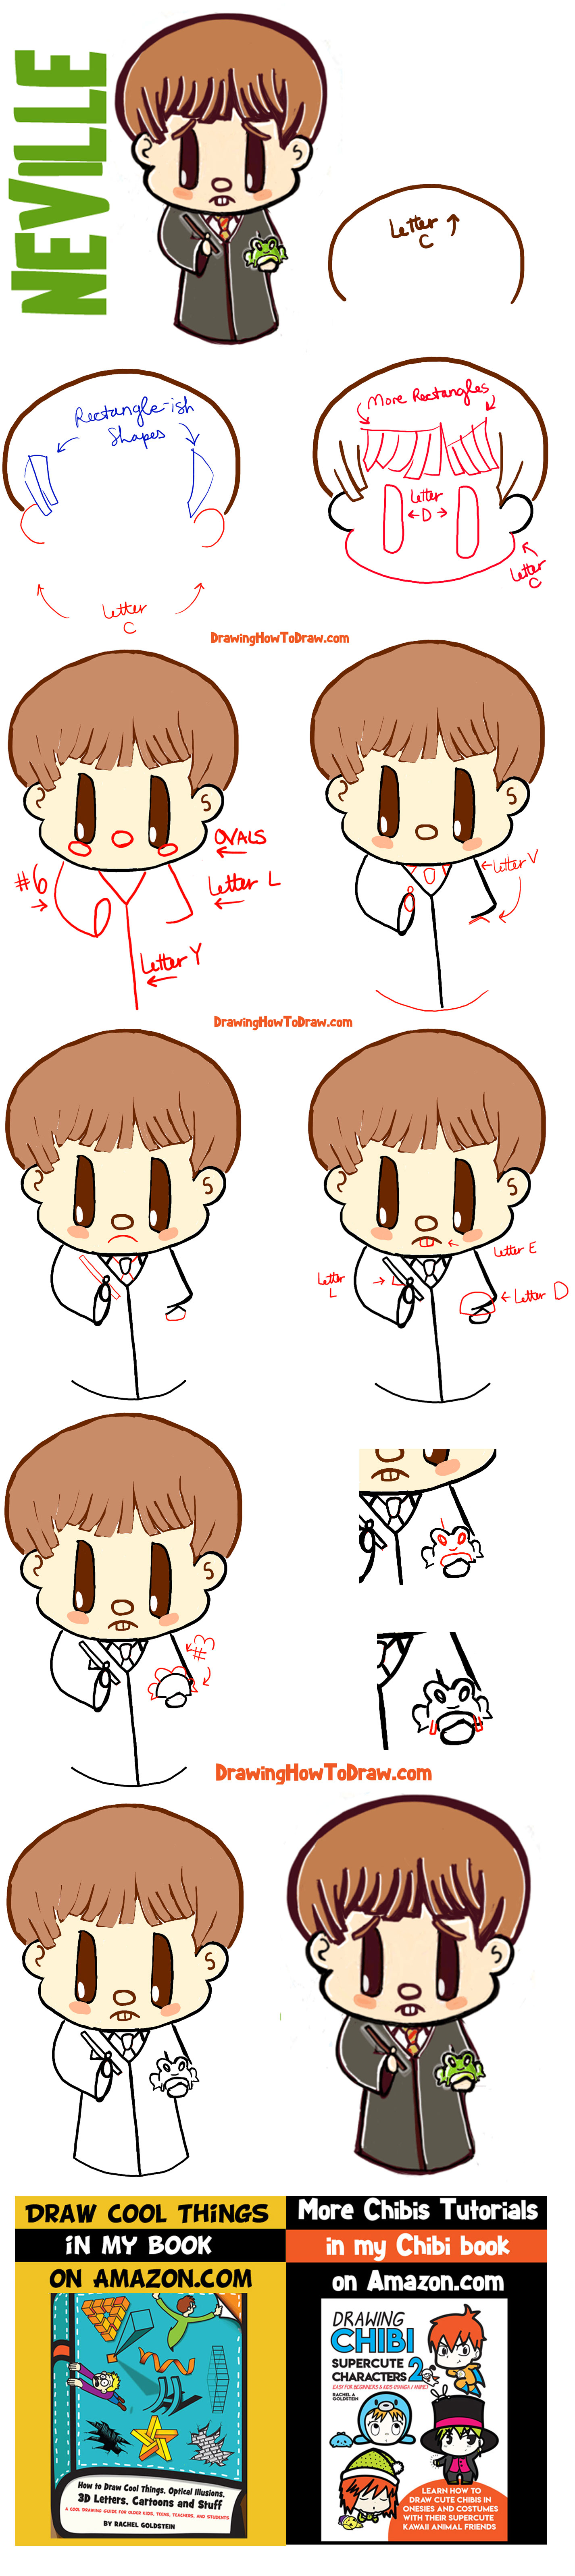 How to Draw Cute Chibi Neville Longbottom with Frog from Harry Potter